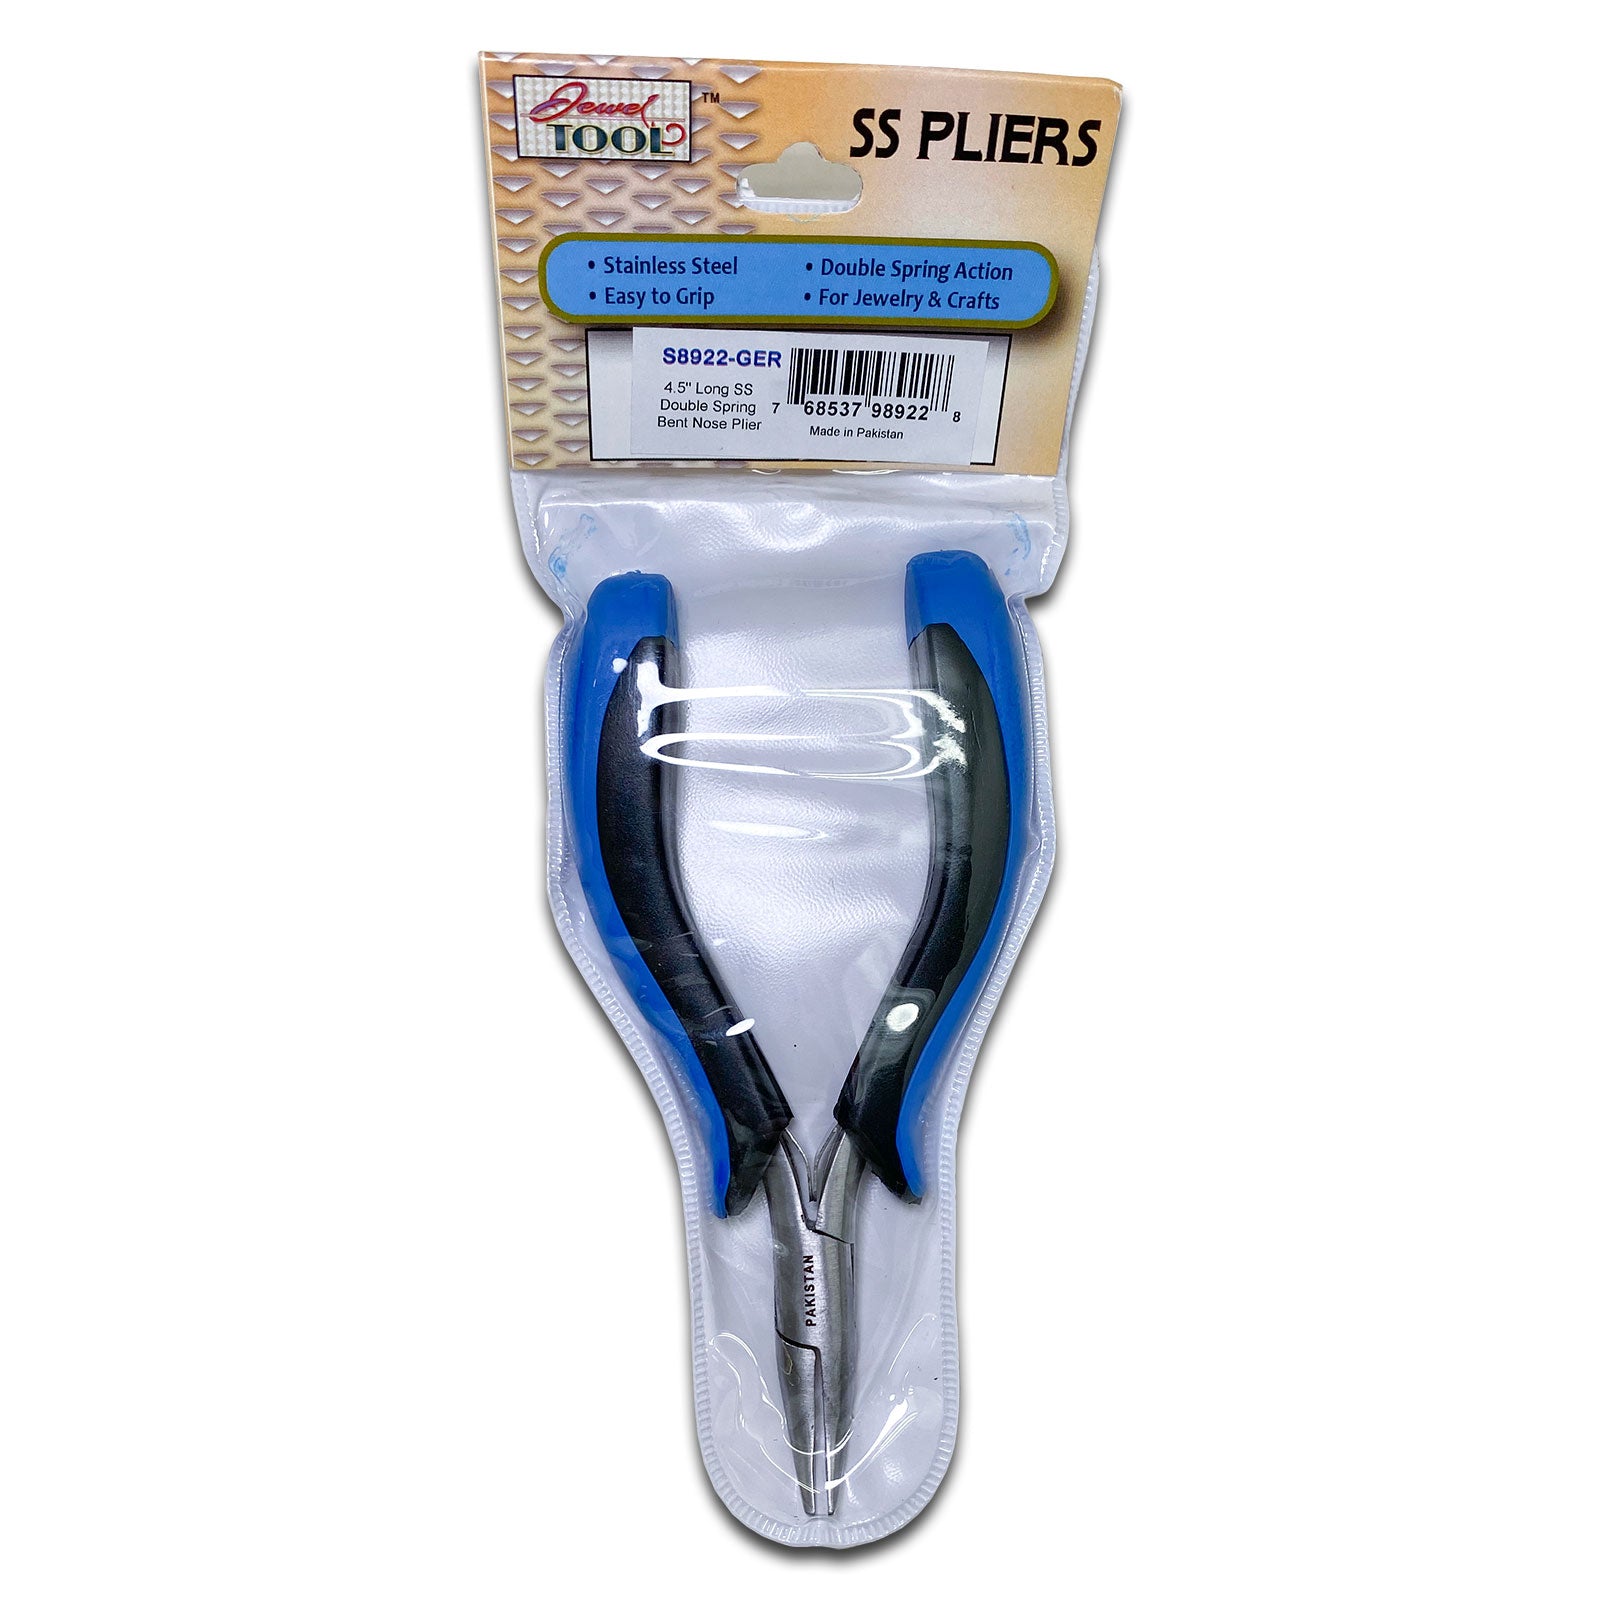 4 1/2" Stainless Steel Bent Nose Pliers